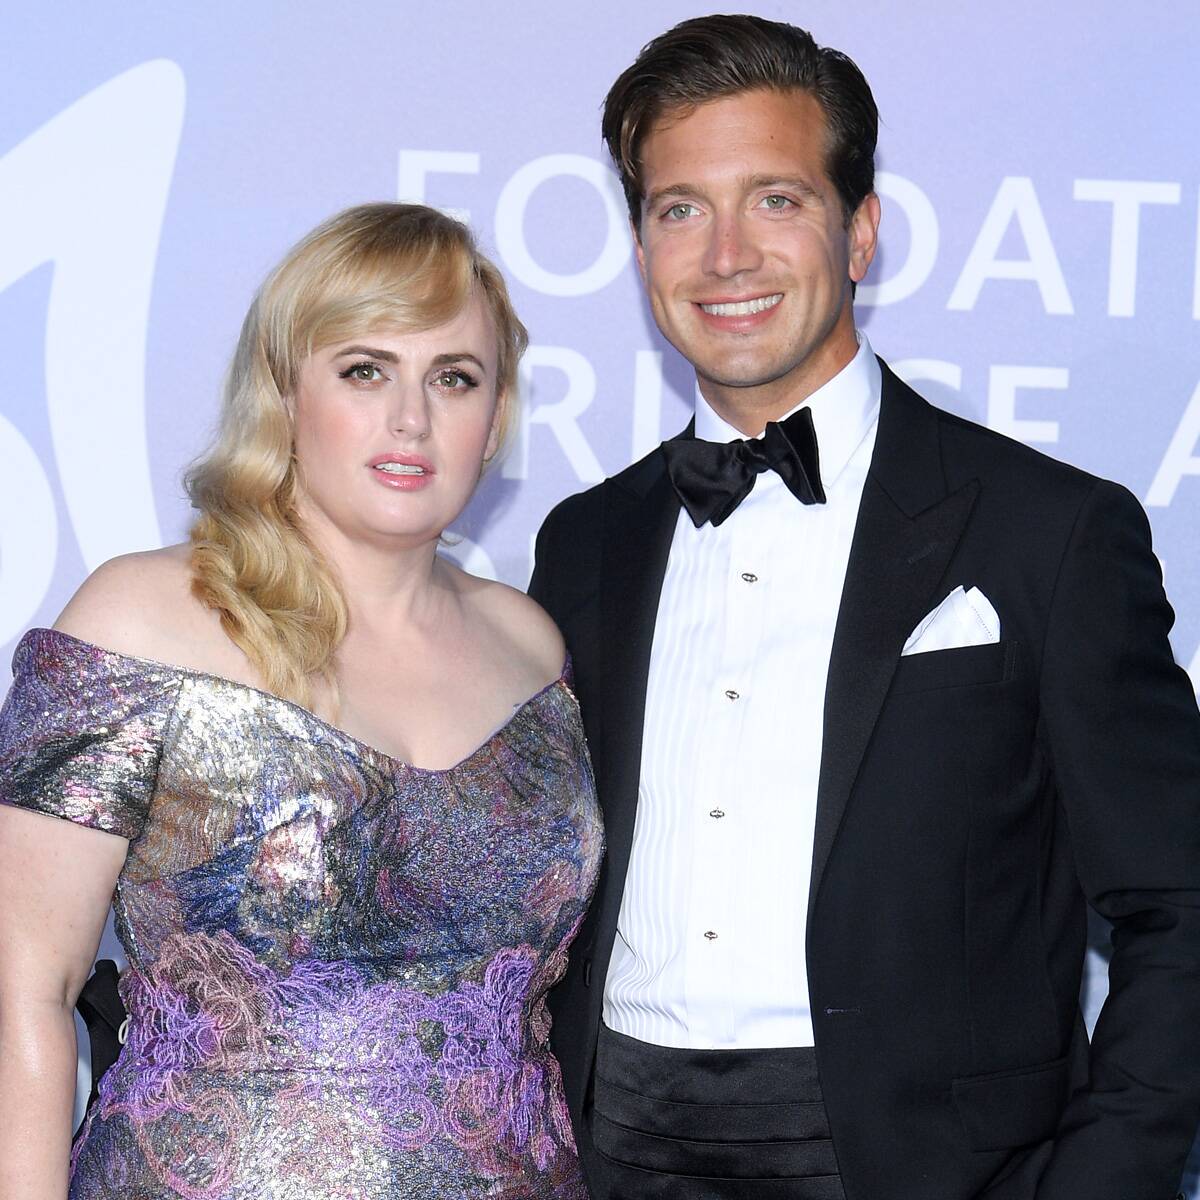 Rebel Wilson Confirms She's Single After Jacob Busch Breakup